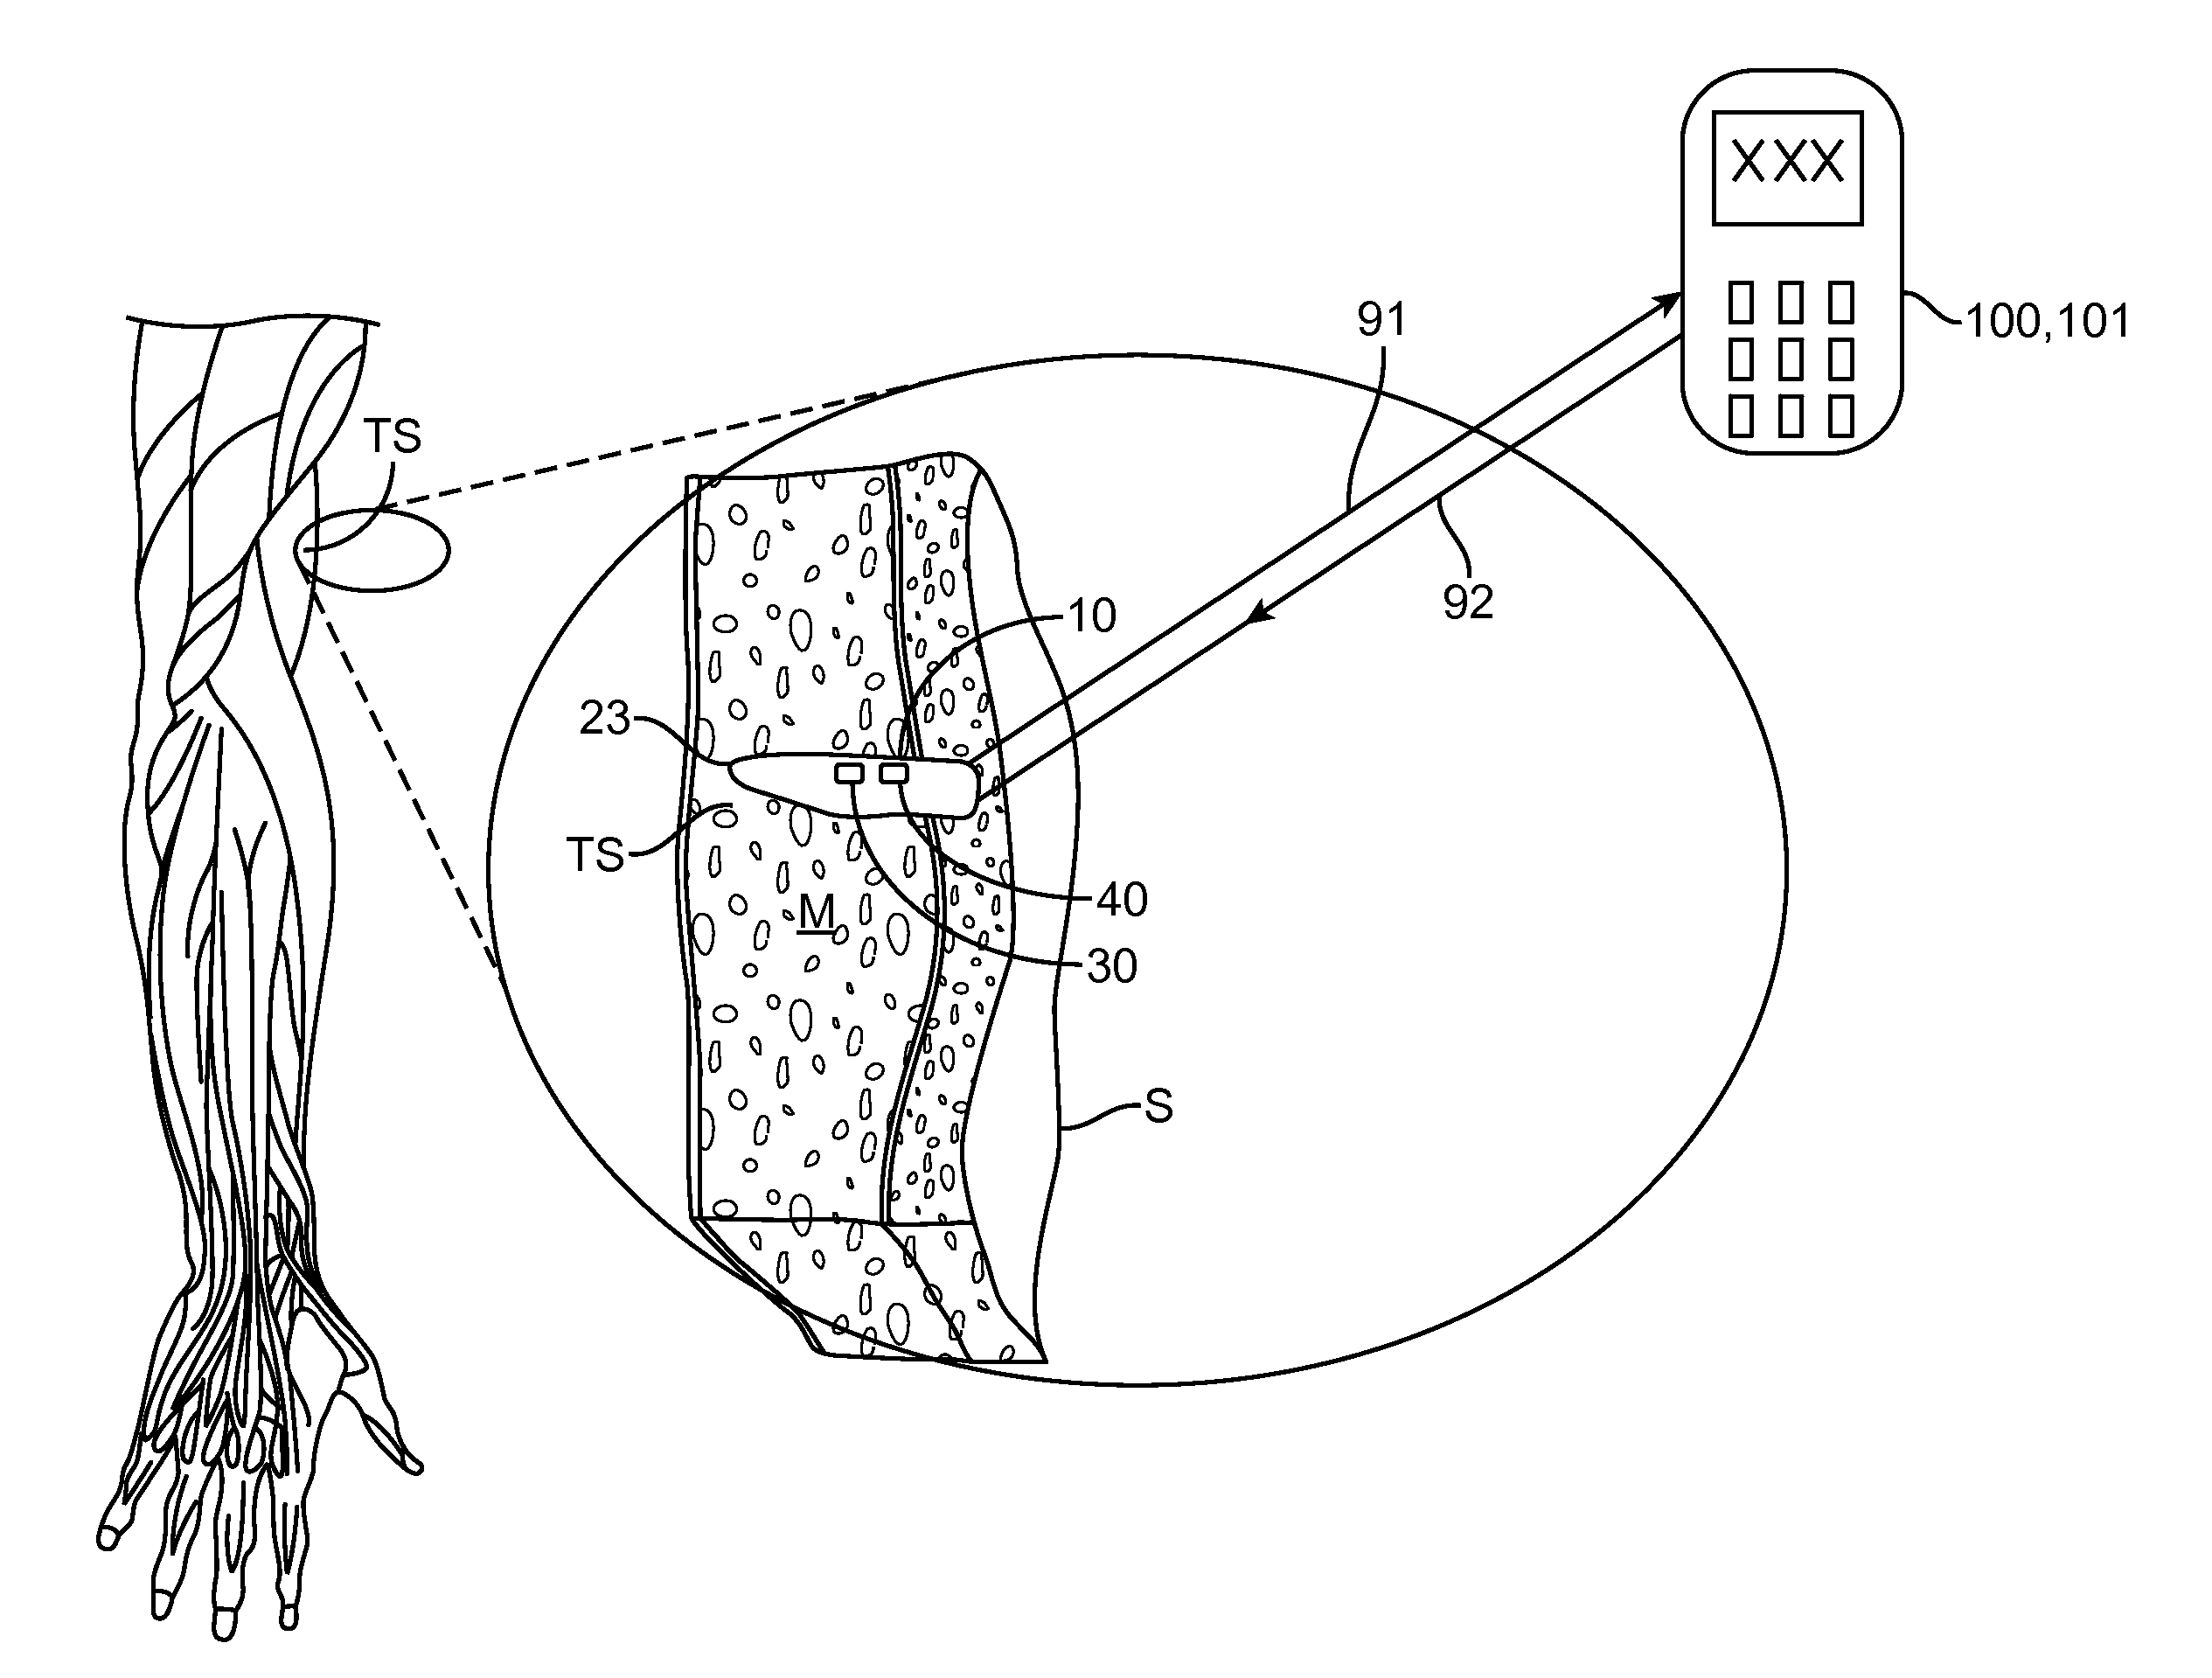 Implantable oximetric measurement apparatus and method of use